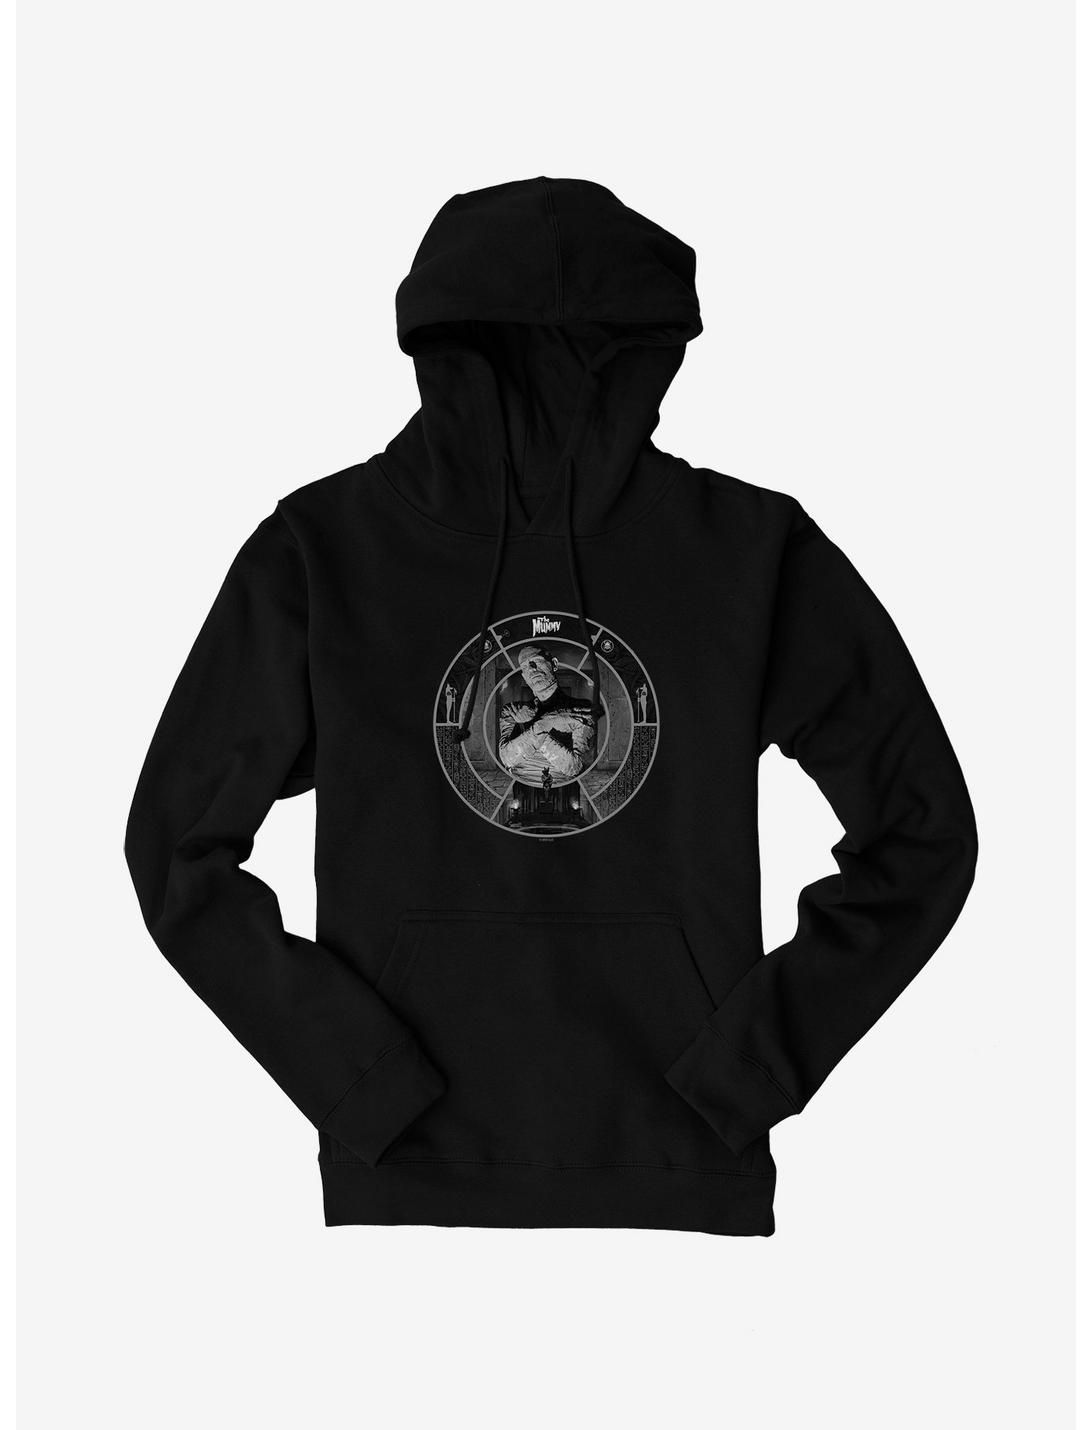 Universal Monsters The Mummy Black & White Relic Hoodie, , hi-res